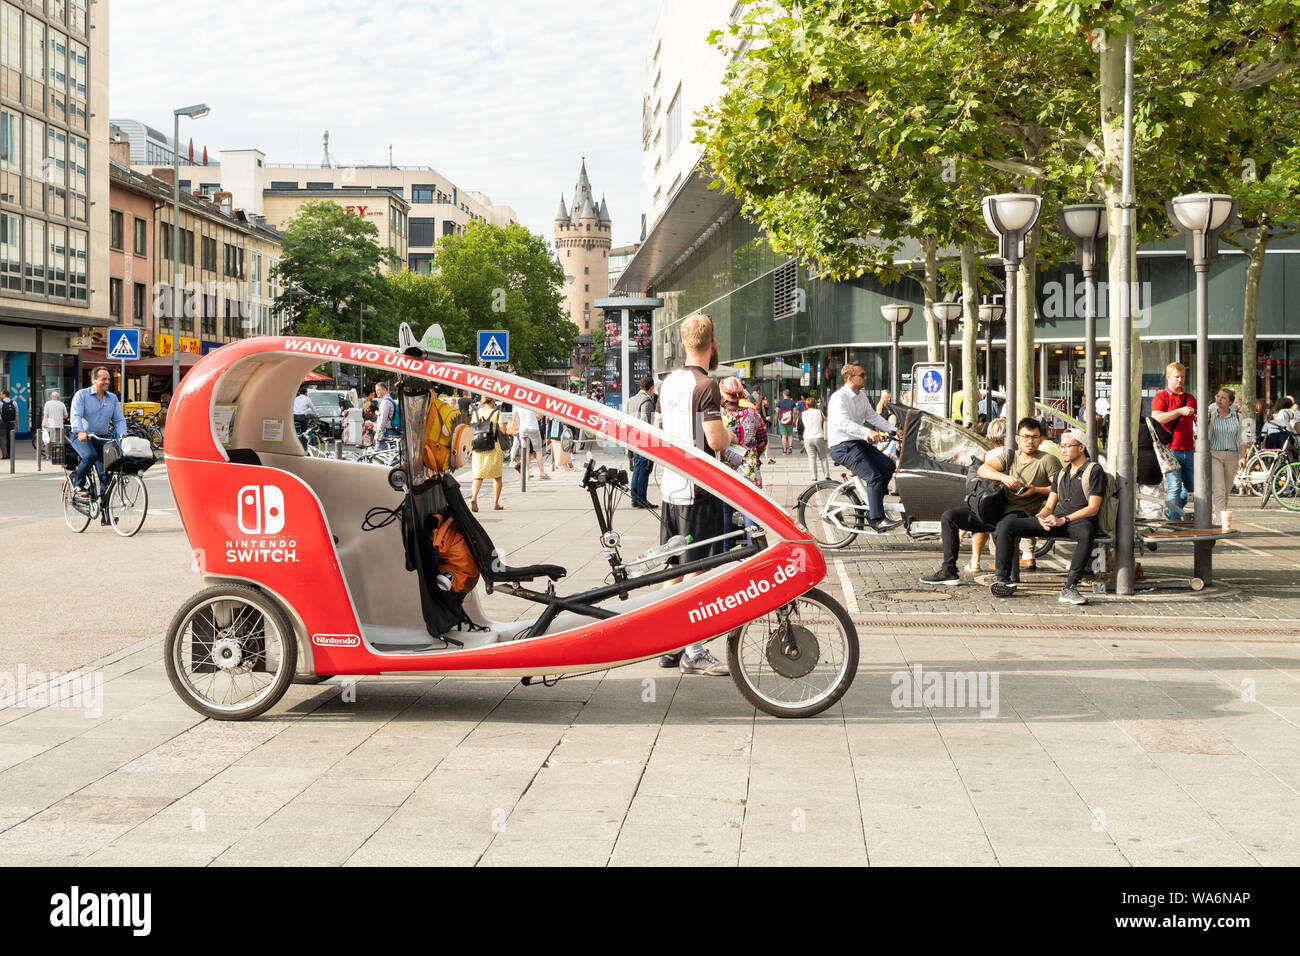 Velotaxi with nintendo switch advertising in Frankfurt am Main, Germany Stock Photo